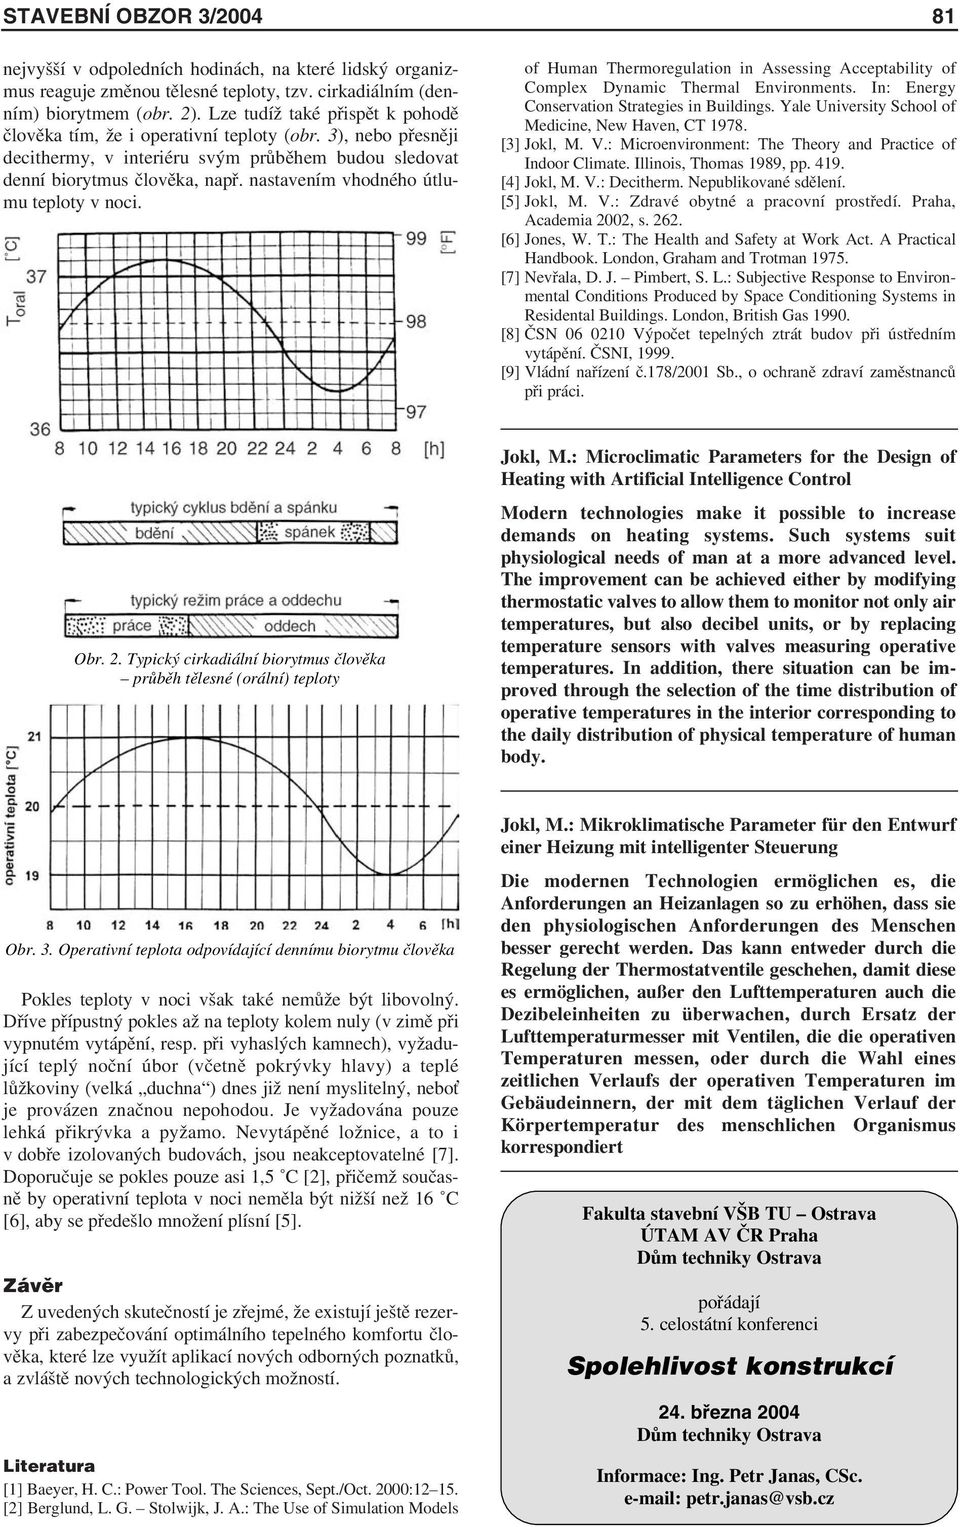 nastavením vhodného útlumu teploty v noci. of Human Thermoregulation in Assessing Acceptability of Complex Dynamic Thermal Environments. In: Energy Conservation Strategies in Buildings.